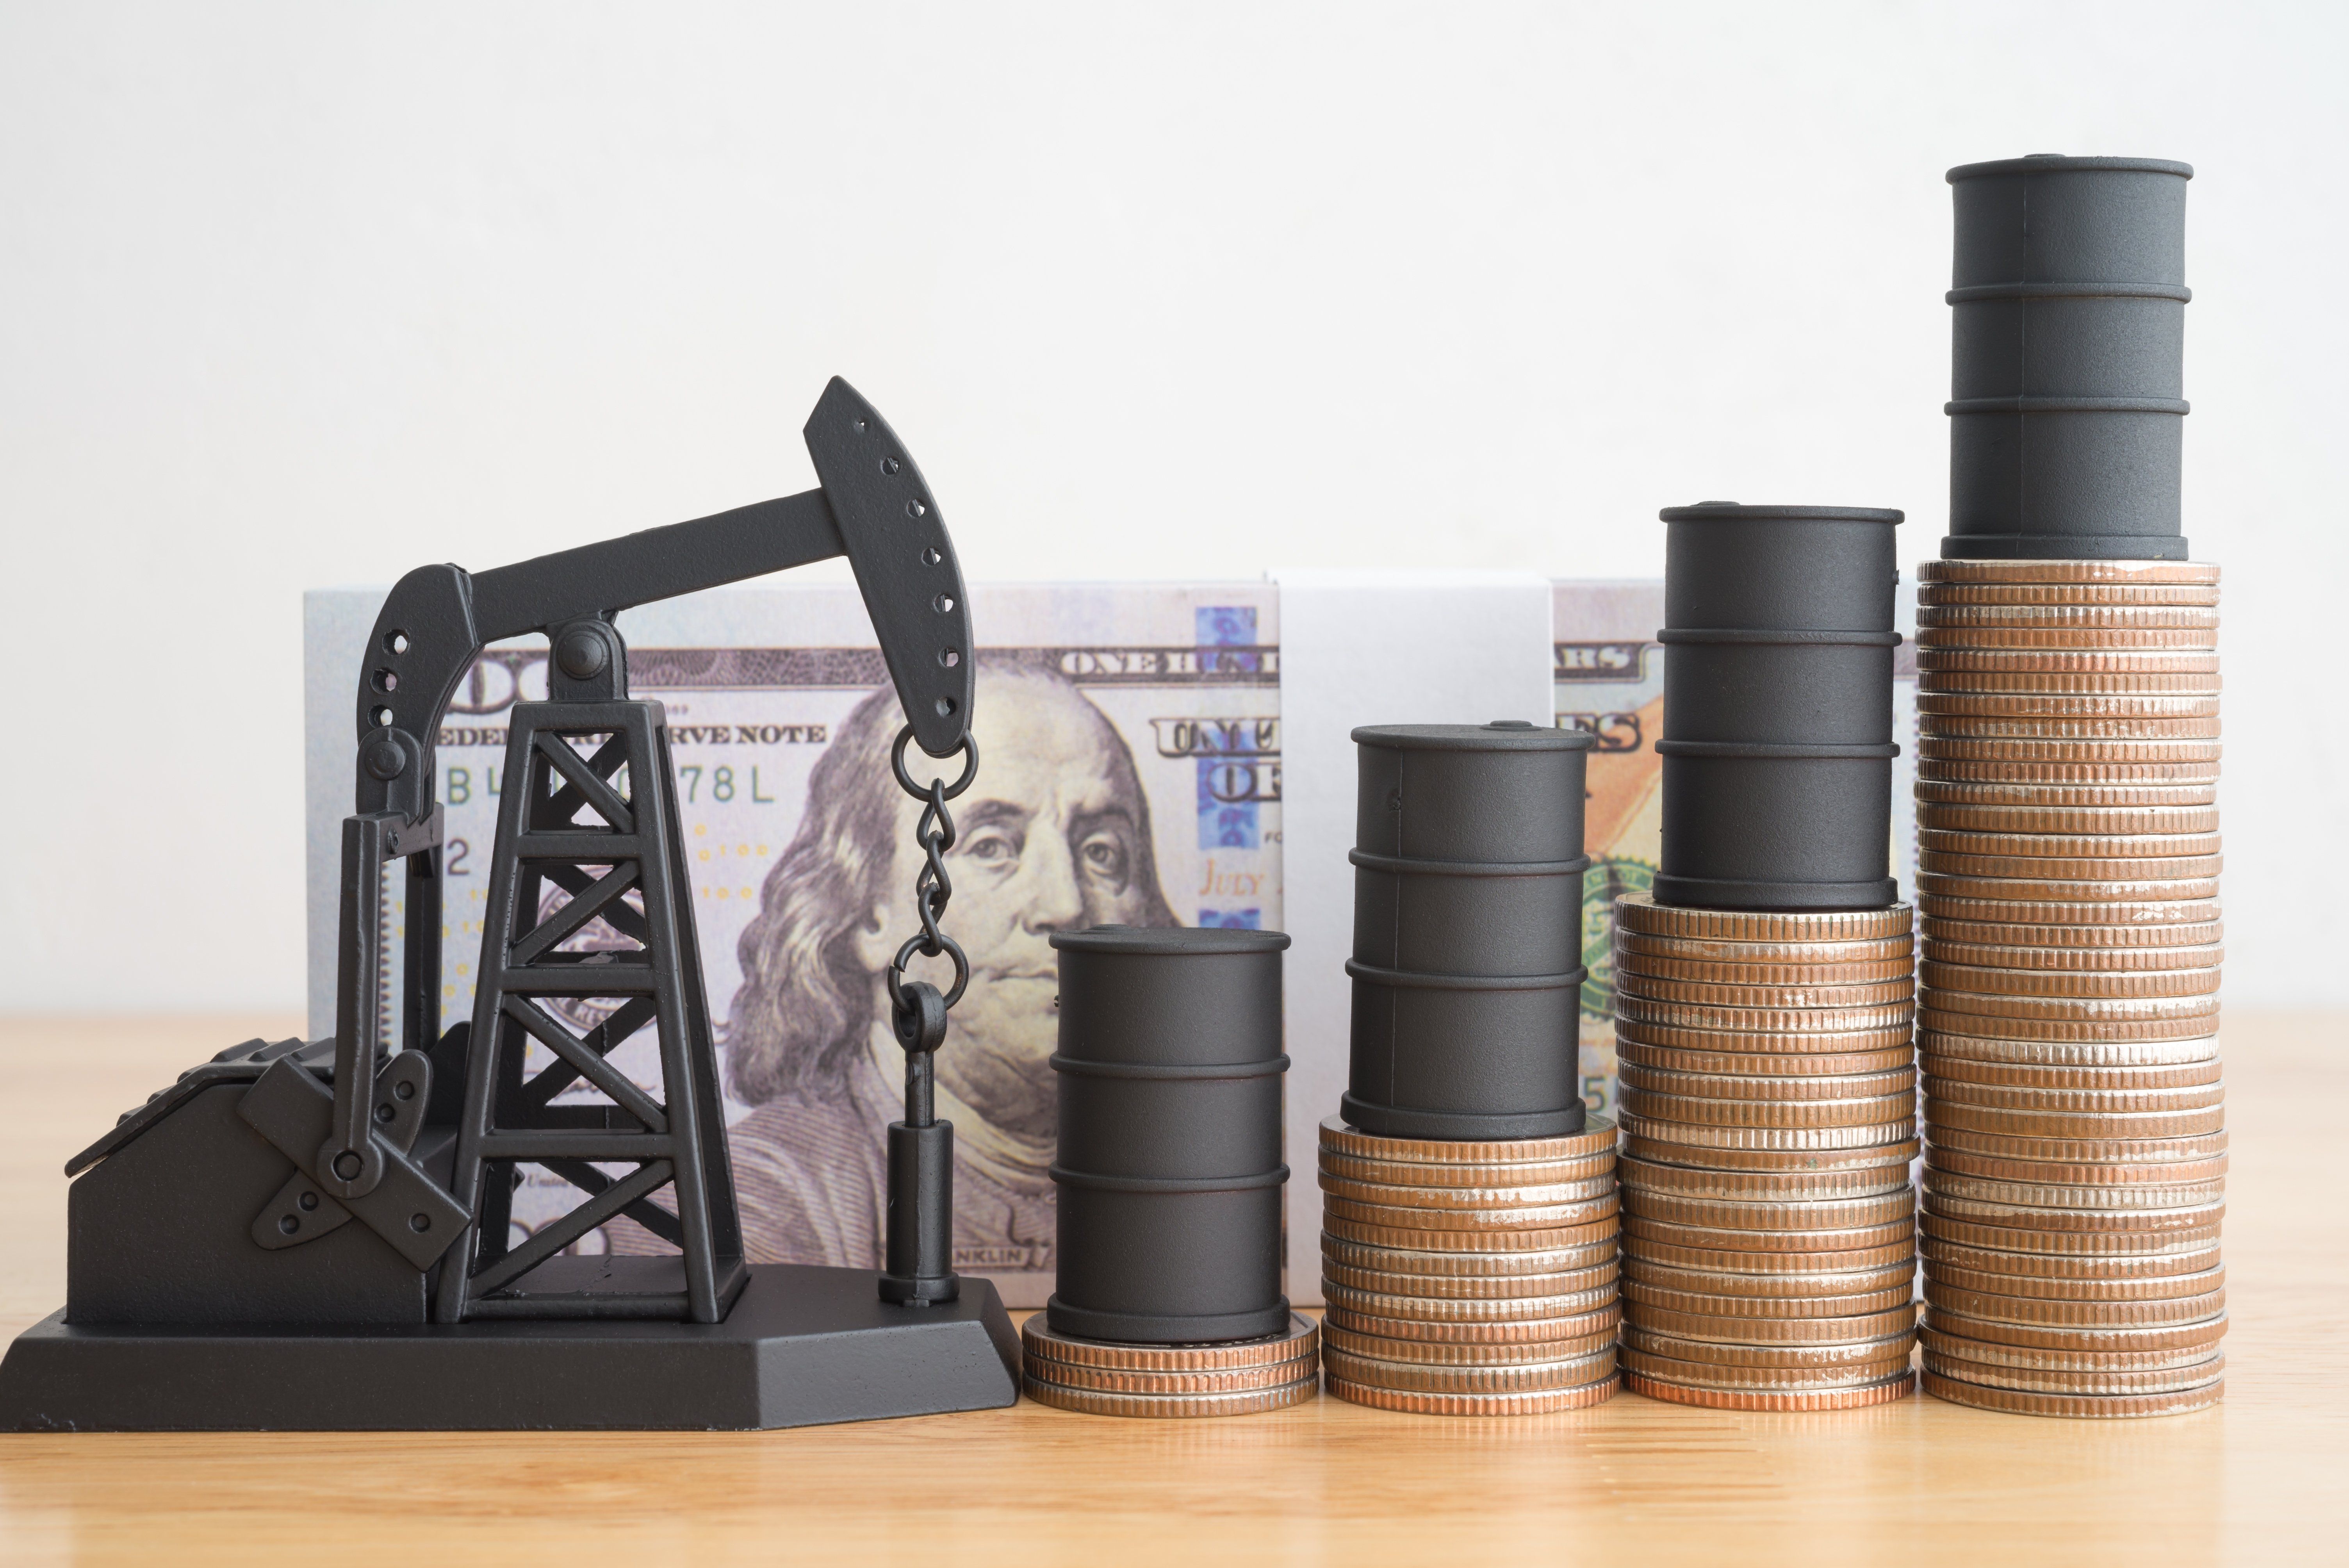 Crude oil prices increased as growing economy resulted in global petroleum demand rising faster than petroleum supply. Concept of crude oil production, petroleum industry or petrodollar, world economy